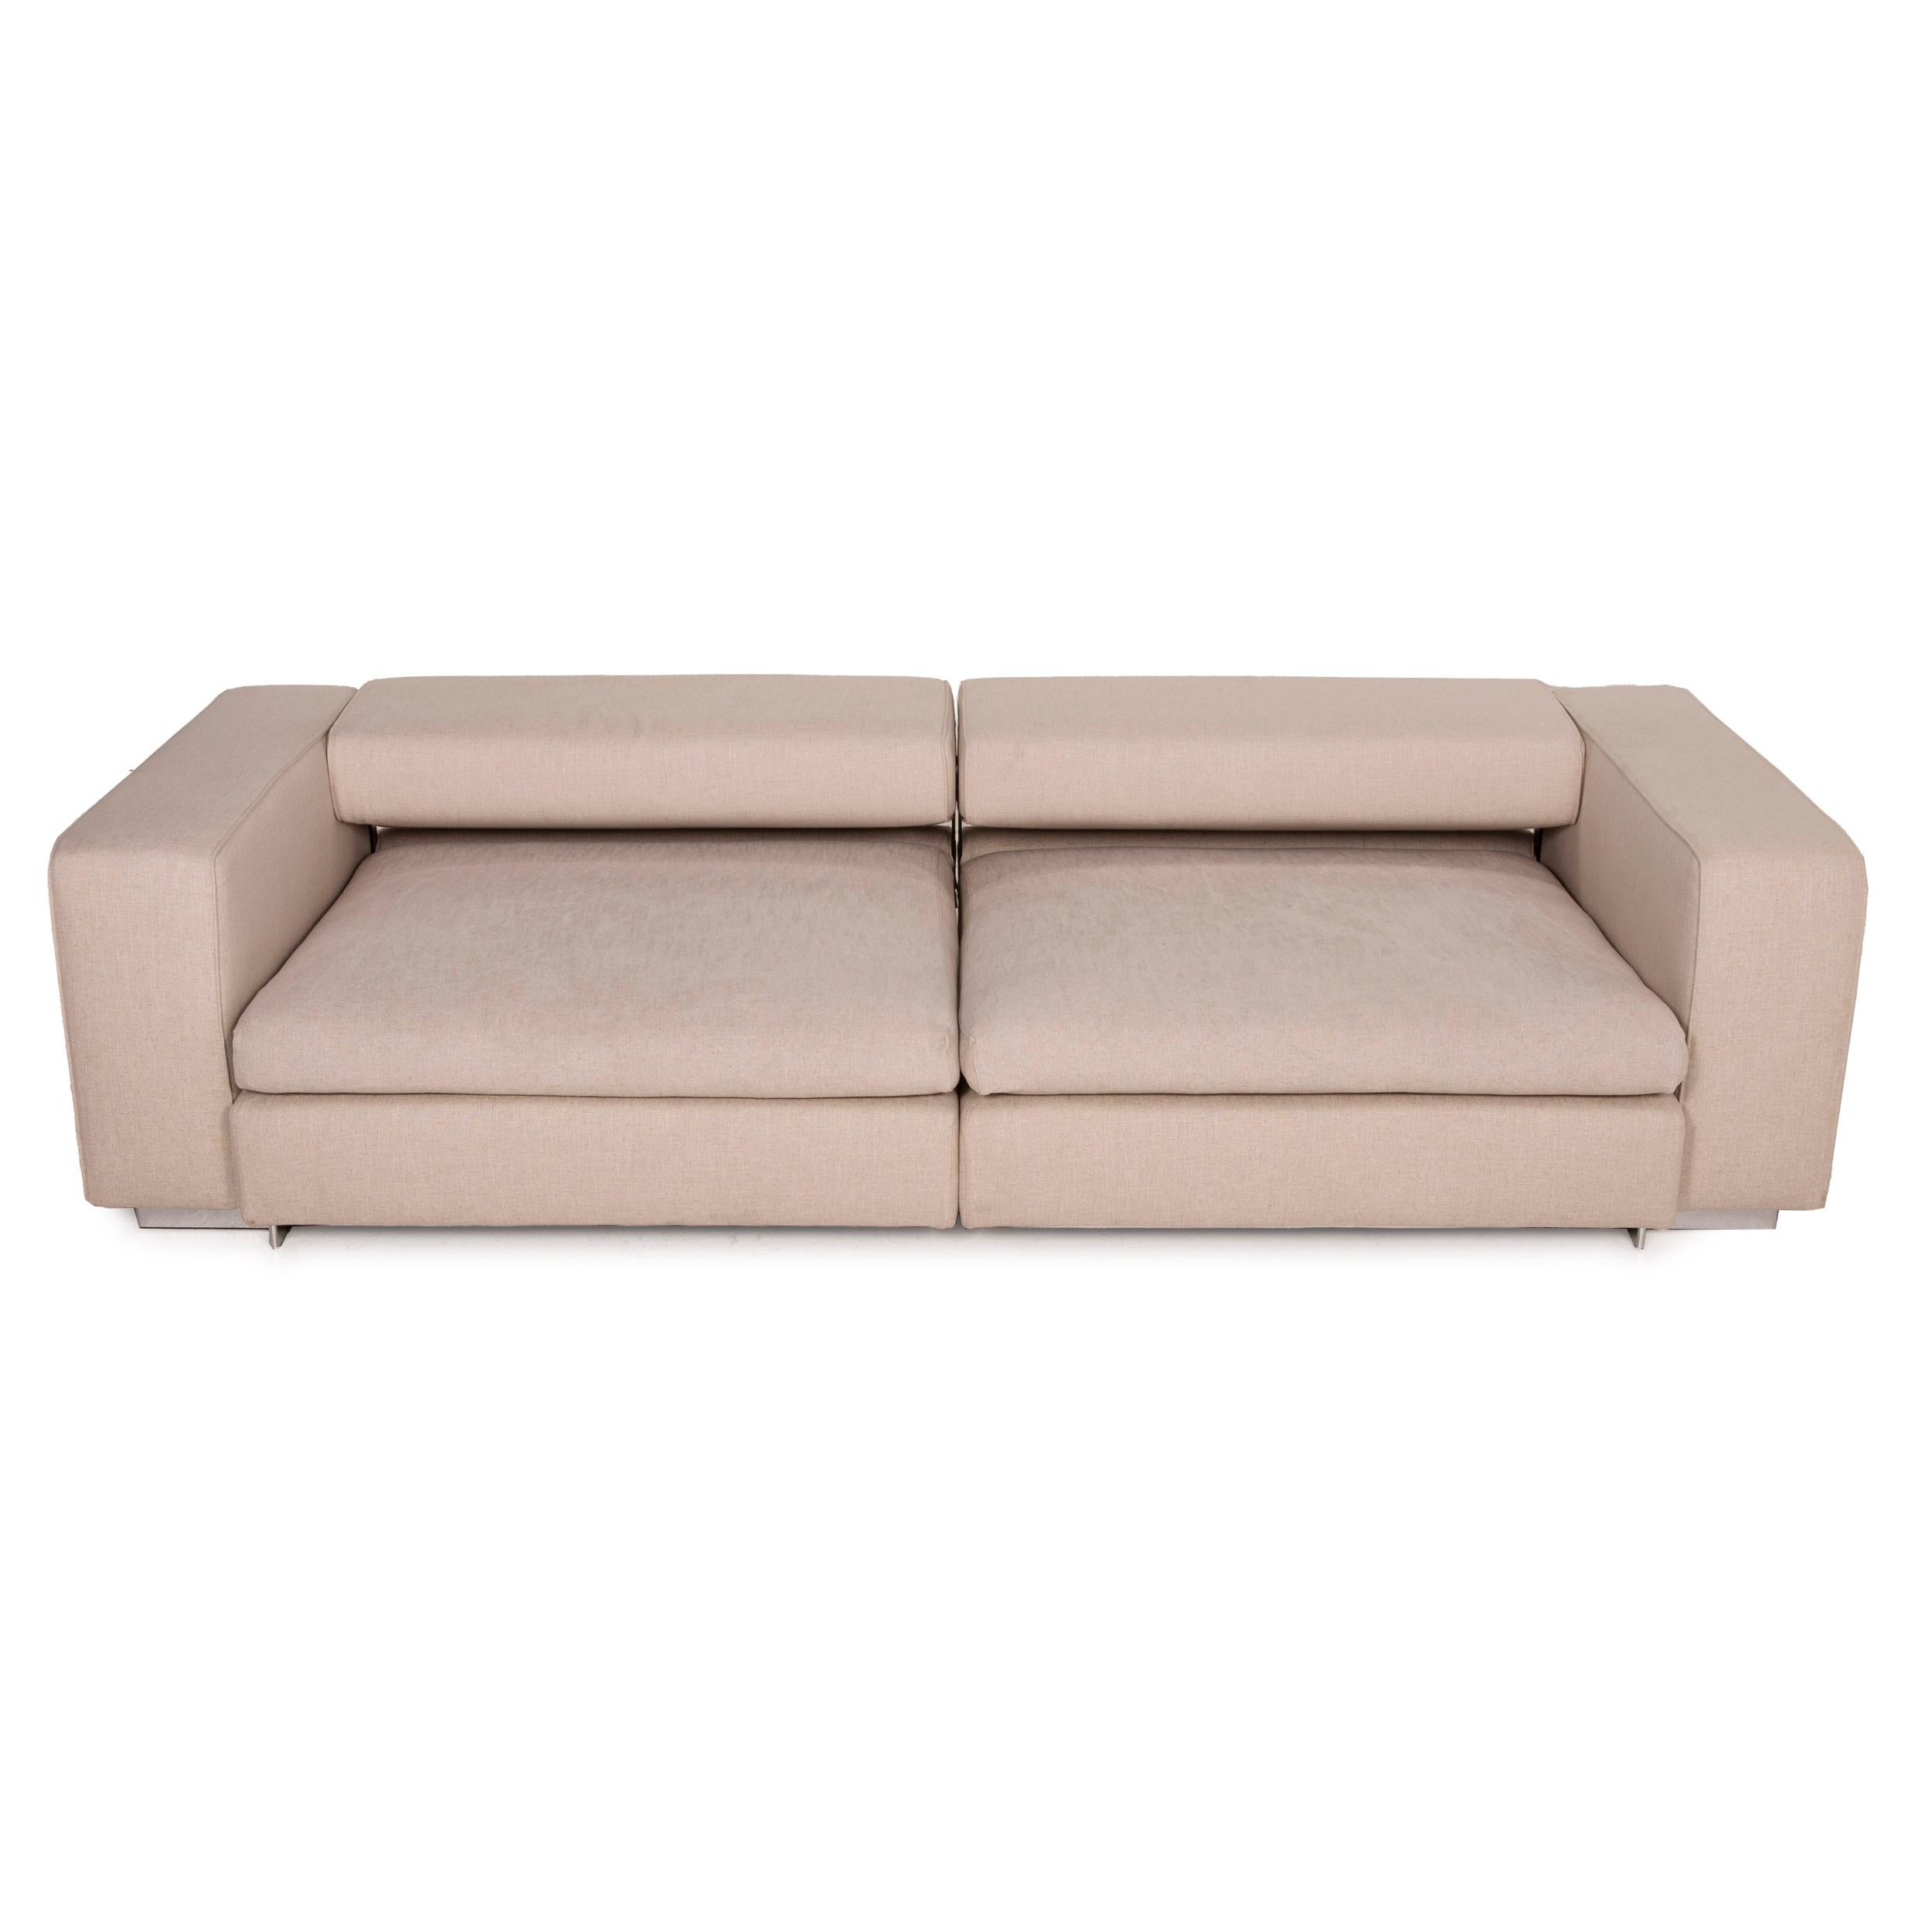 Molteni Turner Fabric Sofa Set Beige 1 Three-Seater 1 Two-Seater Function For Sale 8